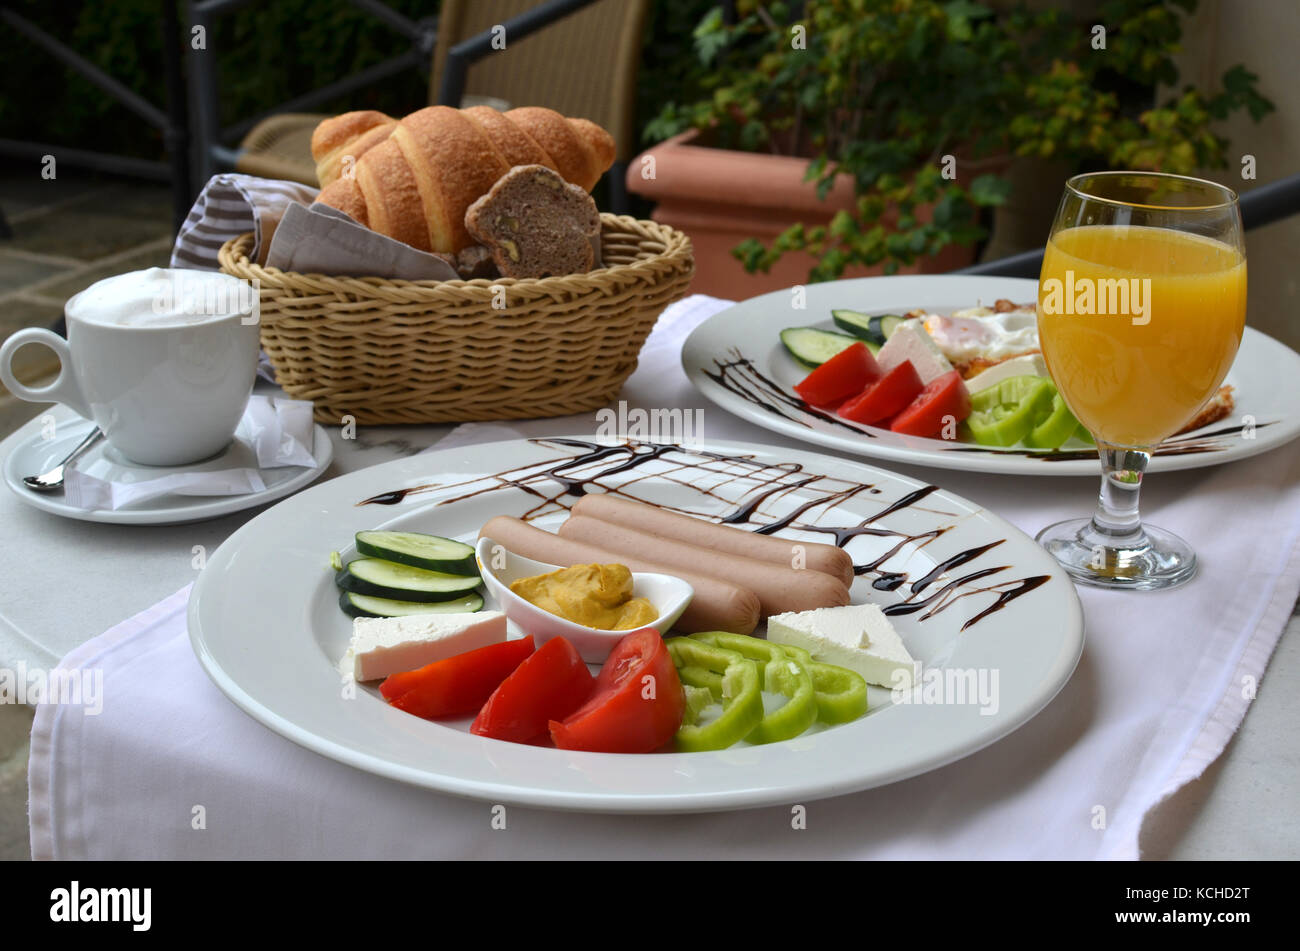 Table with nicely served  American breakfast - sausages, vegetables, croissants Stock Photo